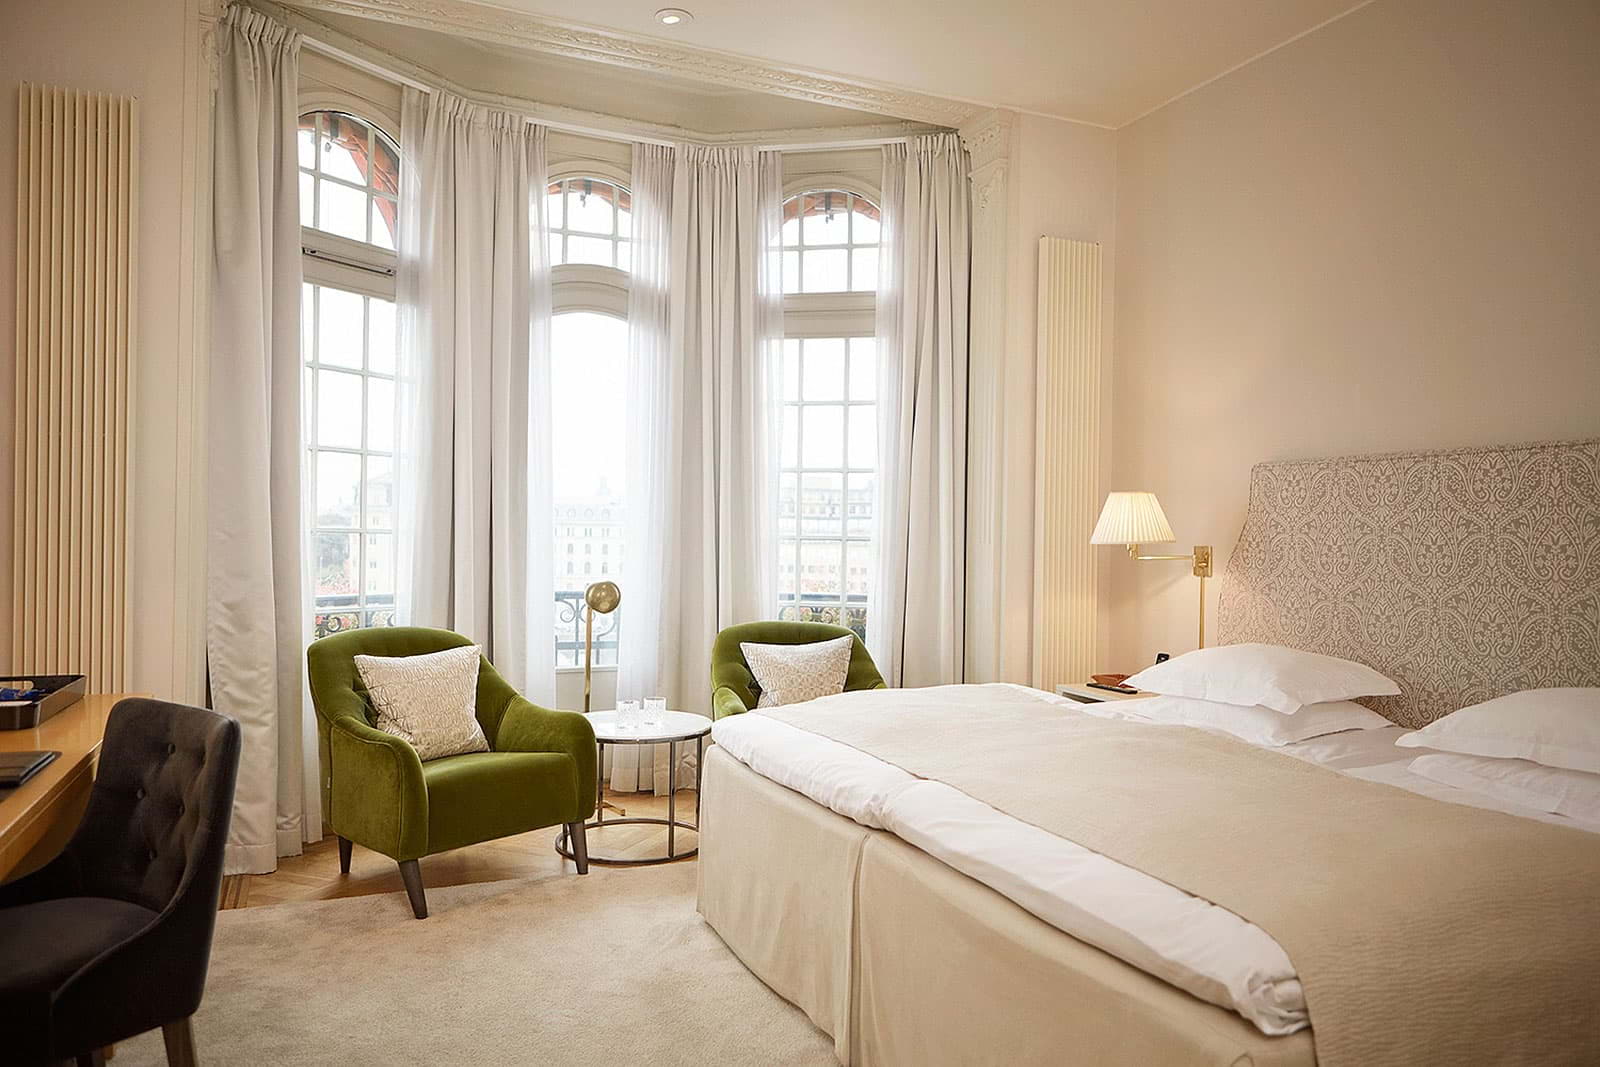 Guide to the best hotels in Central London